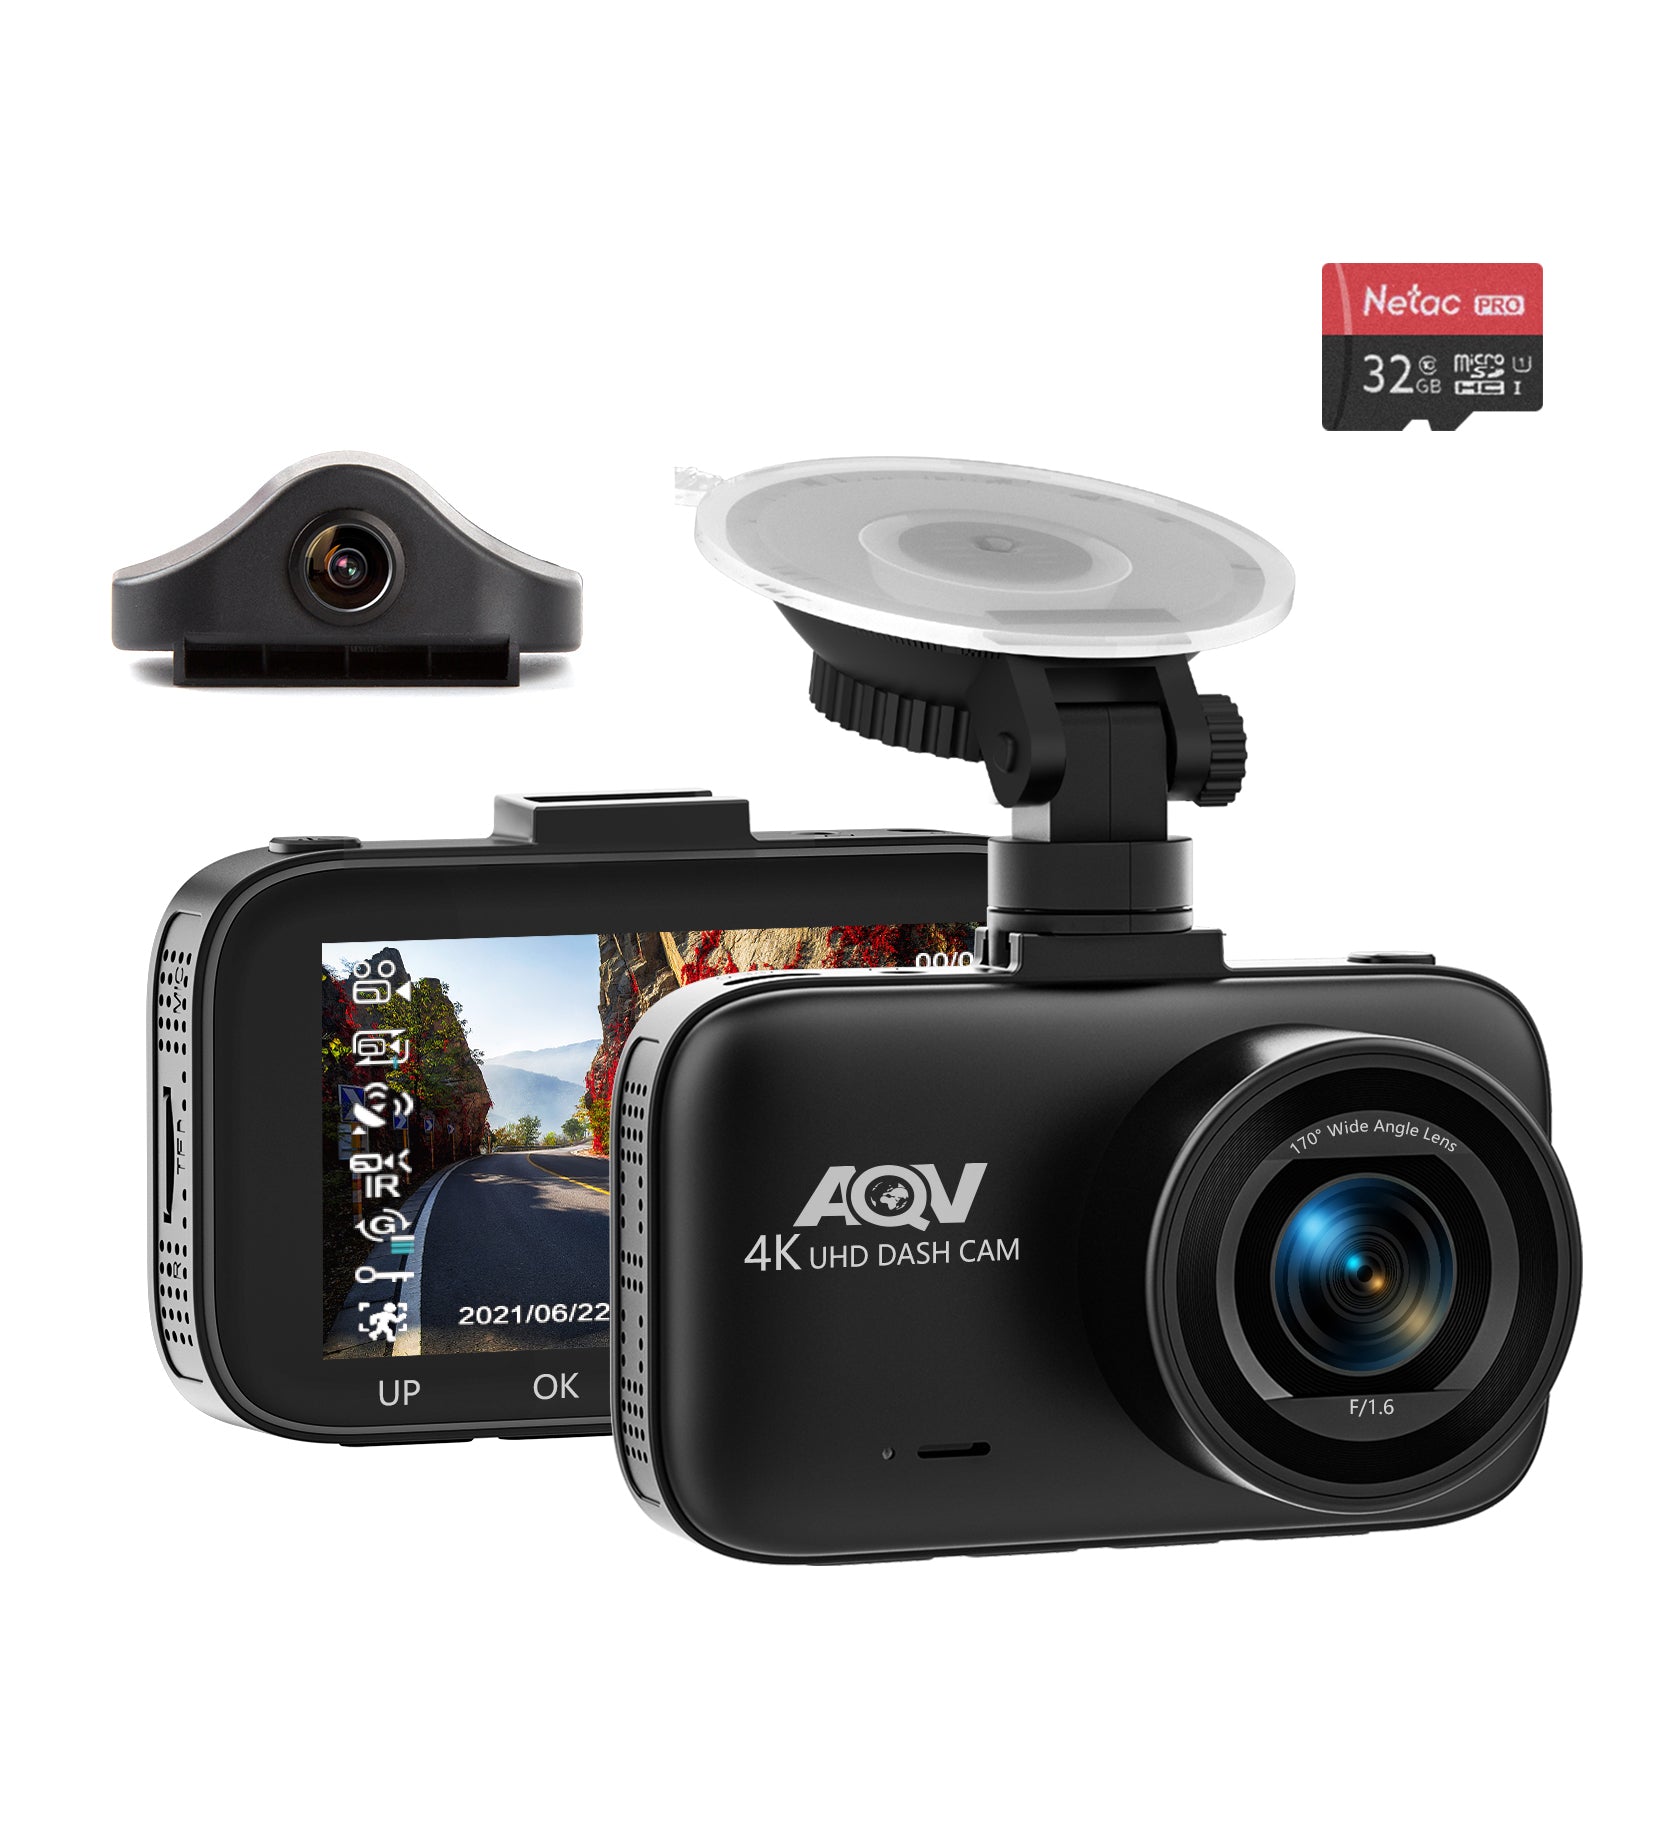 Abask A8 Dashcam Front and Inside 4K 1080P Dual cam - Angle 170°/140° With  Night Vision，GPS，Parking Mode，G-Sensor，Loop Recording，WDR - With 32GB Card